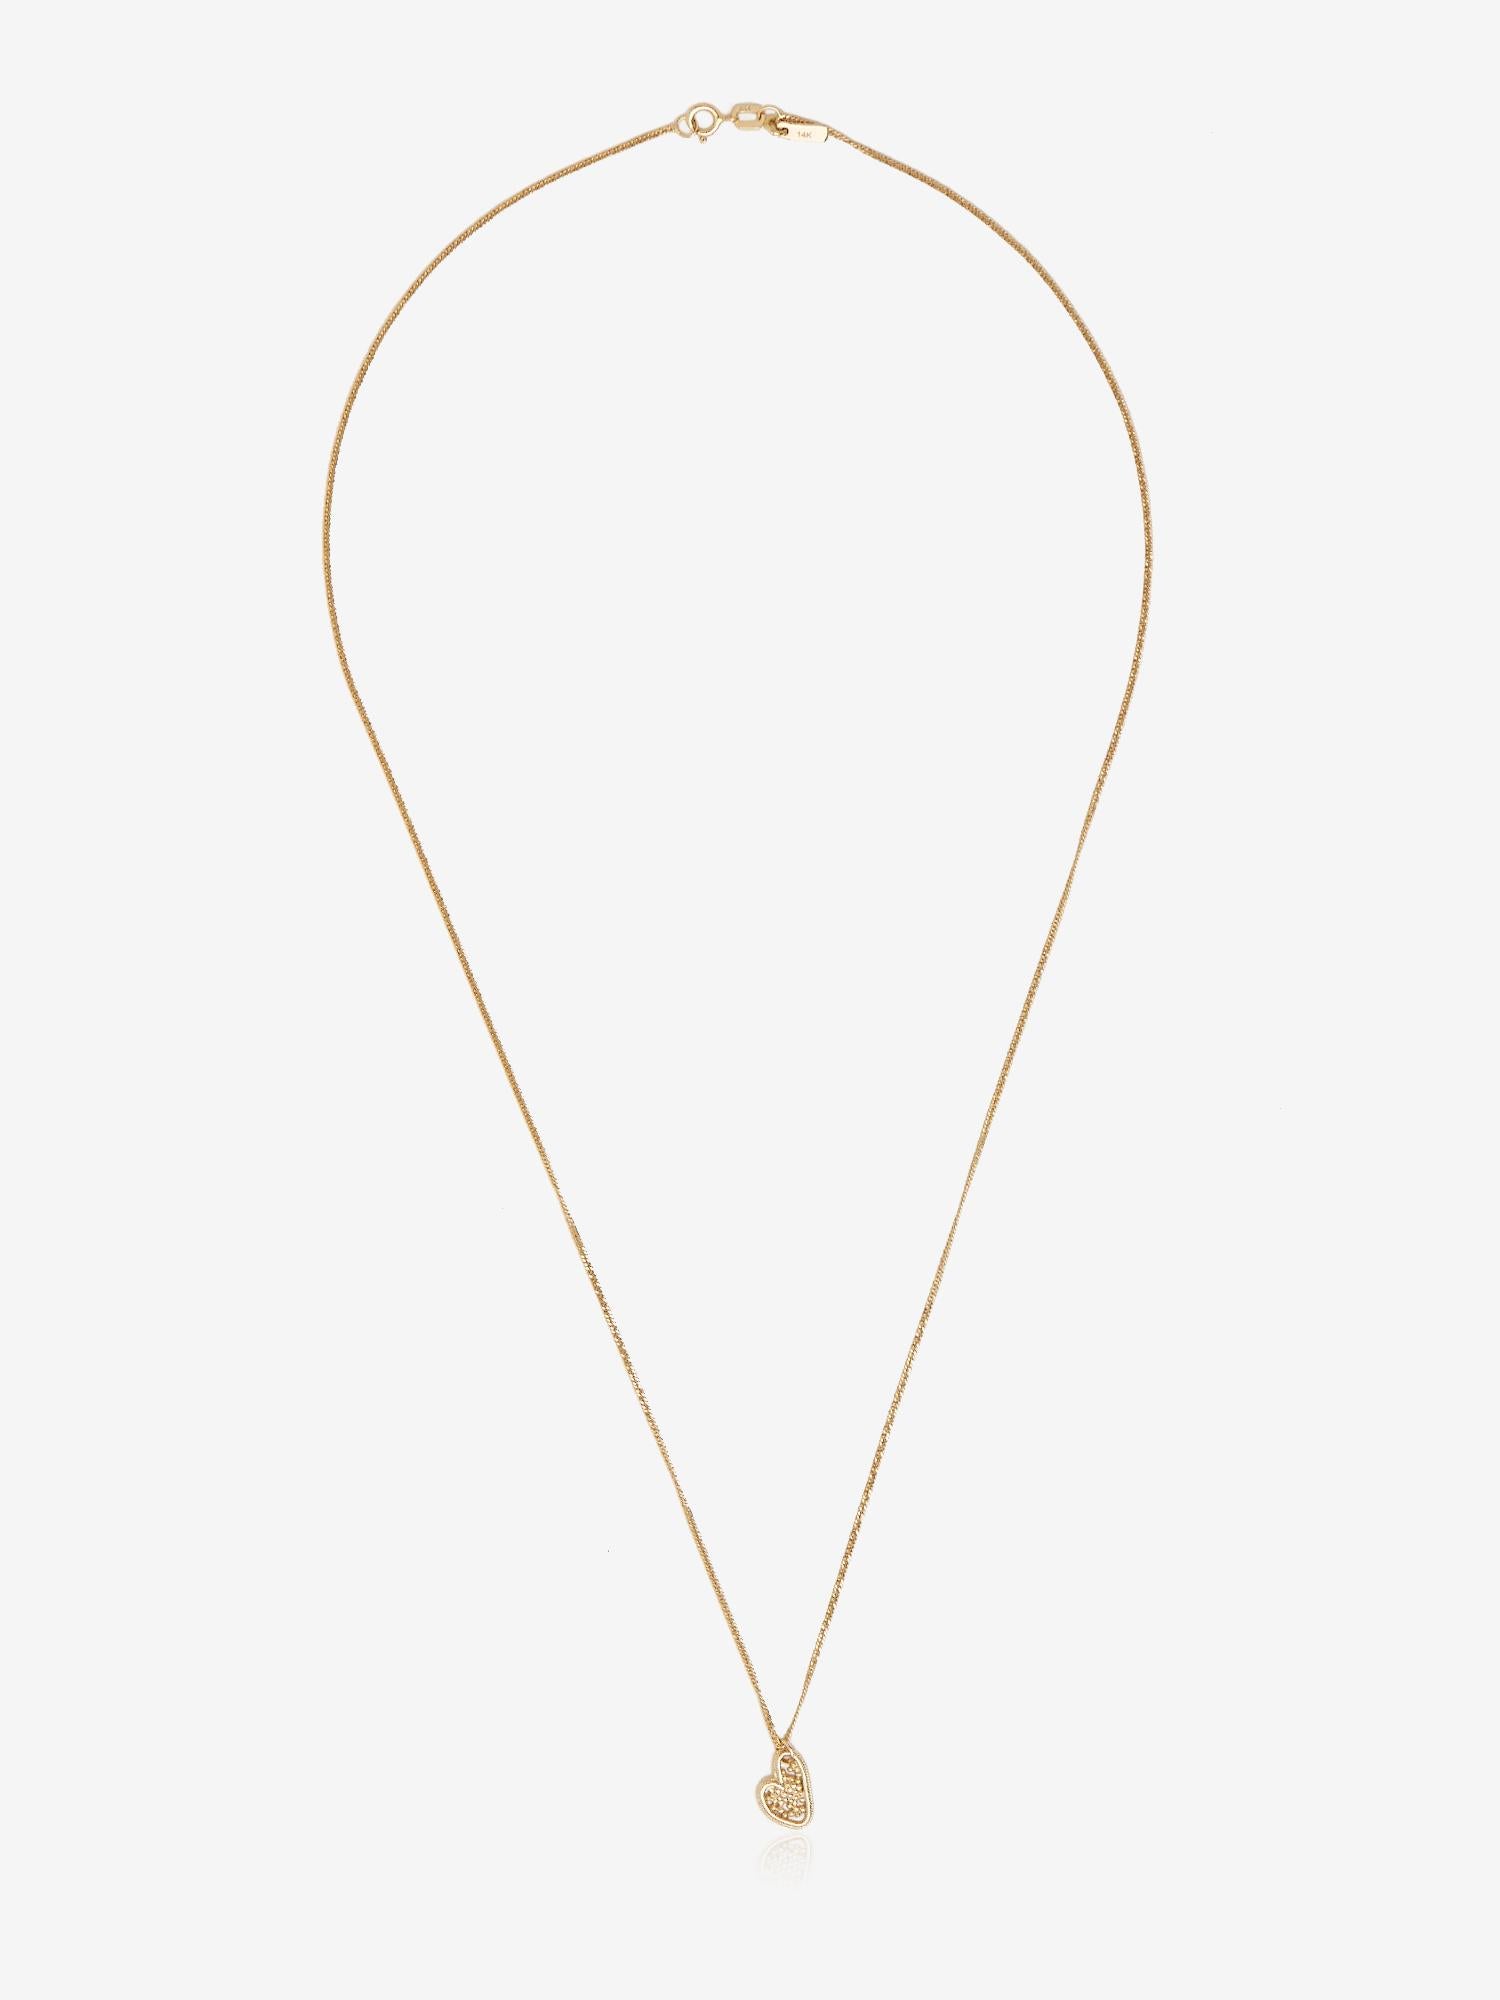 Wear your heart close to you with this contemporary heart necklace. Hanging from our silky vintage foxtail chain this pendant can be worn layered, as your main piece, or paired with our Ame earrings for a matching set. Makes a great gift piece.
•